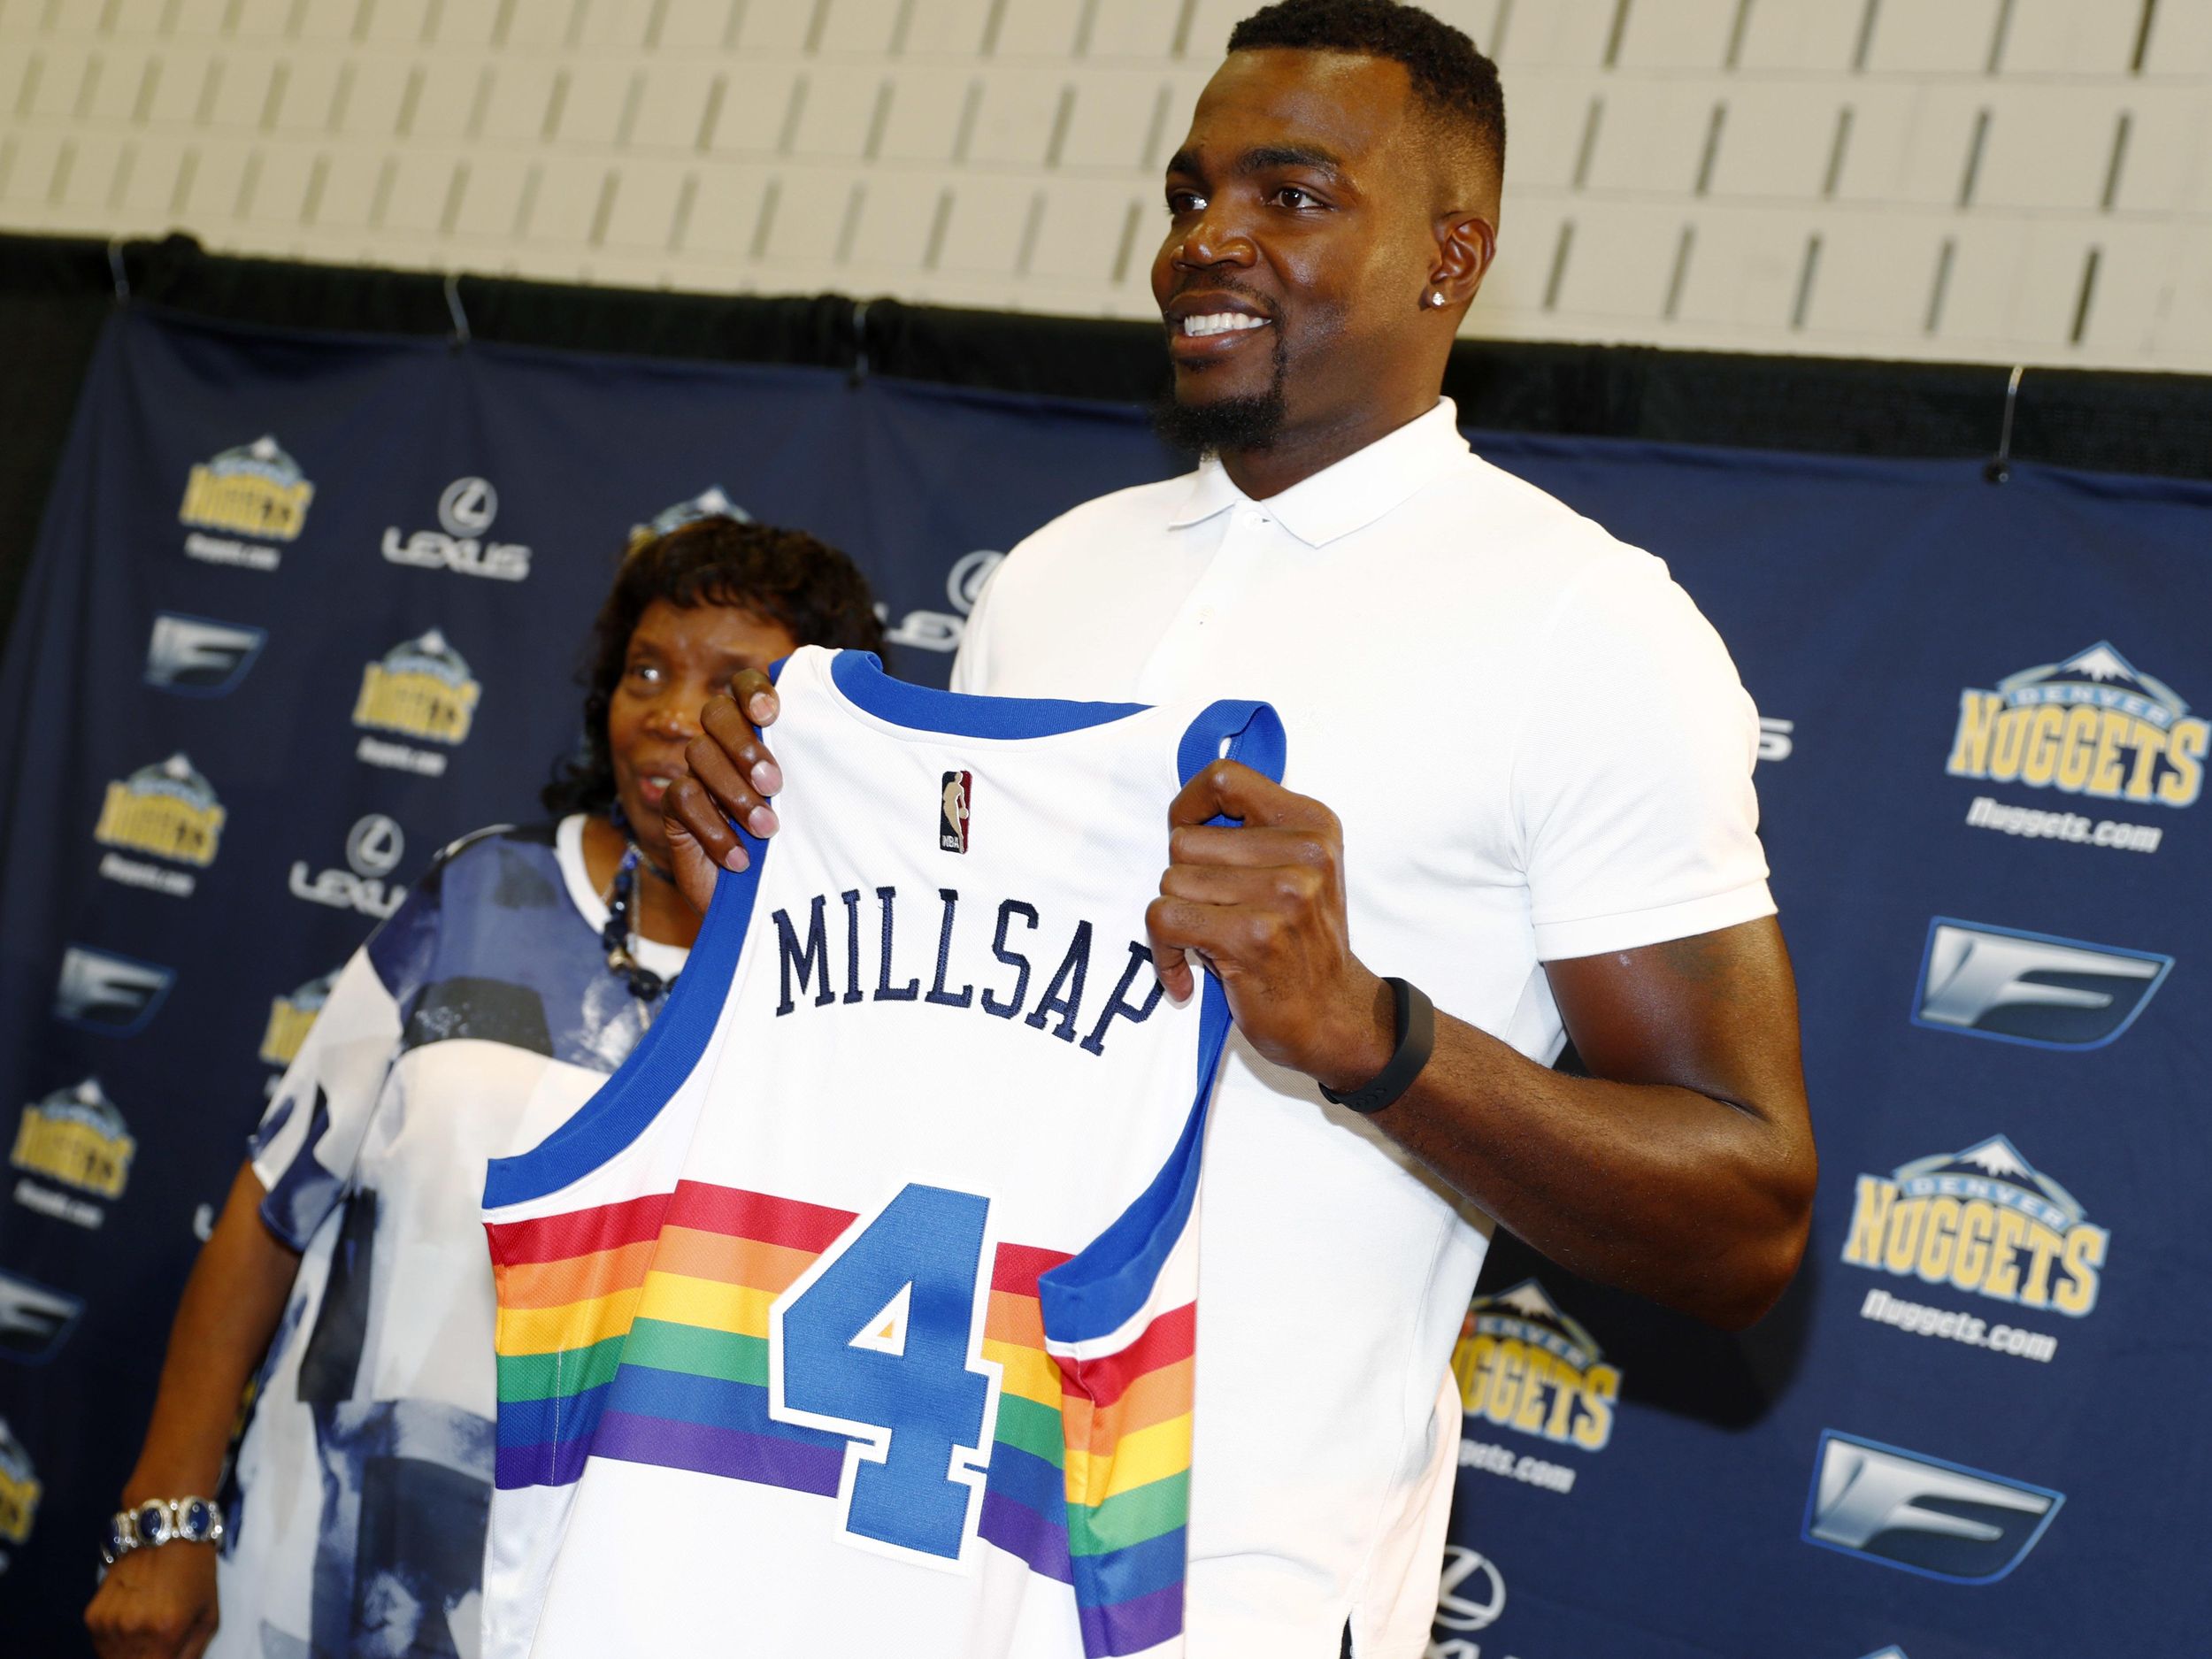 Paul Millsap's Nuggets signing brings him back to his roots